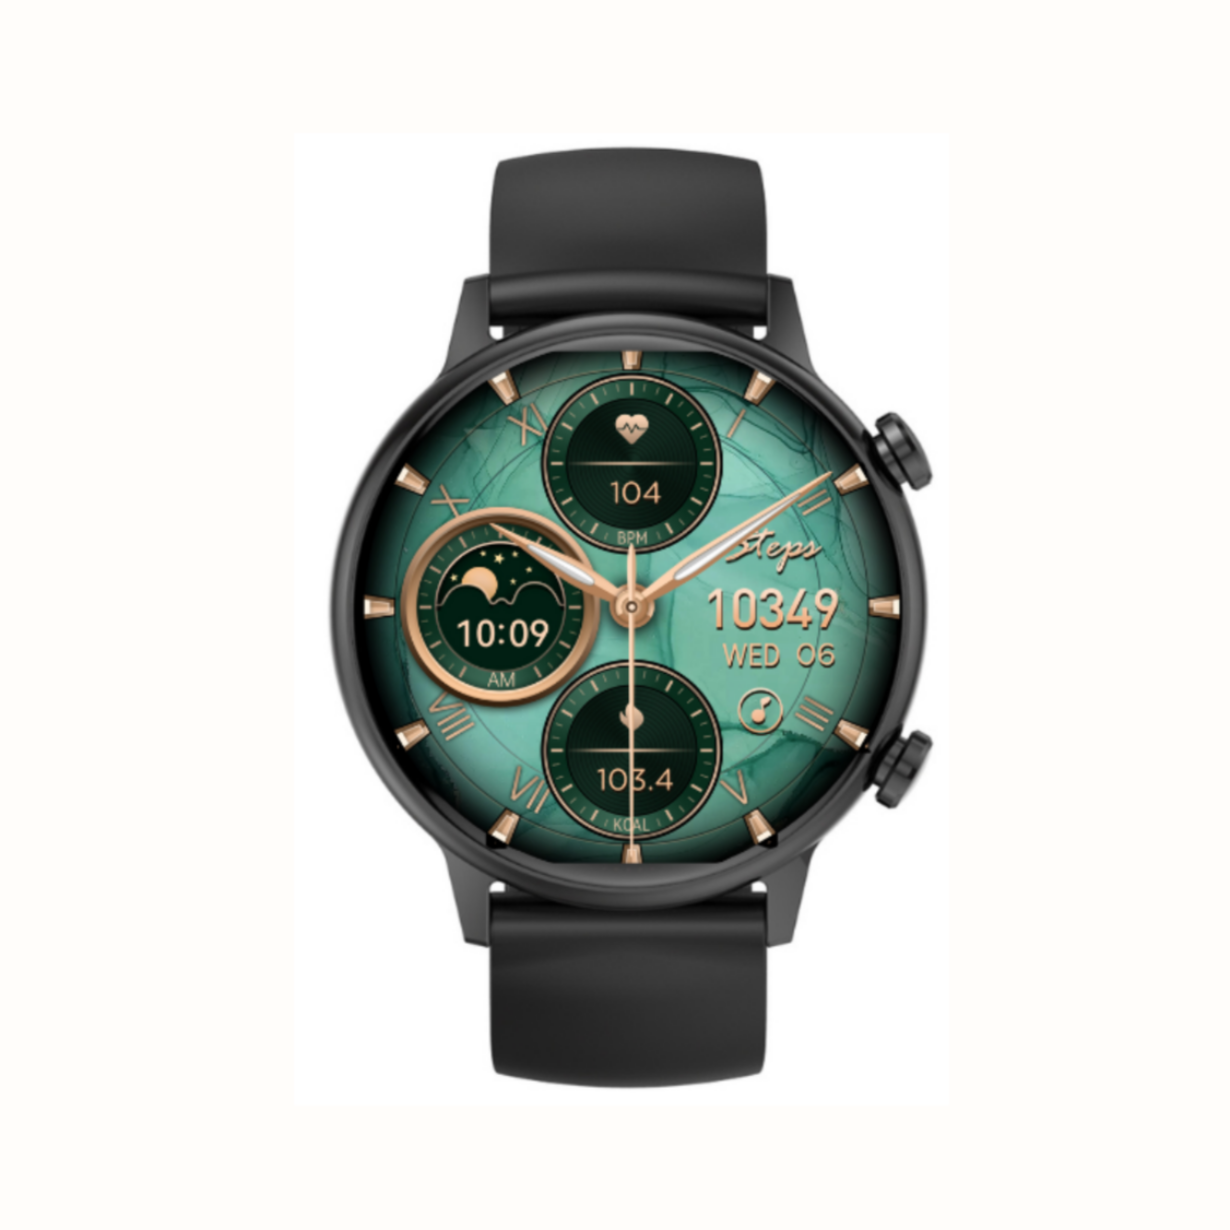 HK39 Women Smartwatch, AMOLED Display, Setup with Android device, Setup with Apple Device, Water resistance - IP68, Best Smart Watch, 2023, Track Activity,Track WOmens Health, Pedometer, Calorie Monitor, Sleep Tracking, Heart Rate Monitor, Blood Oxygen Monitor- Spo2, Multisport Mode, Color- Black